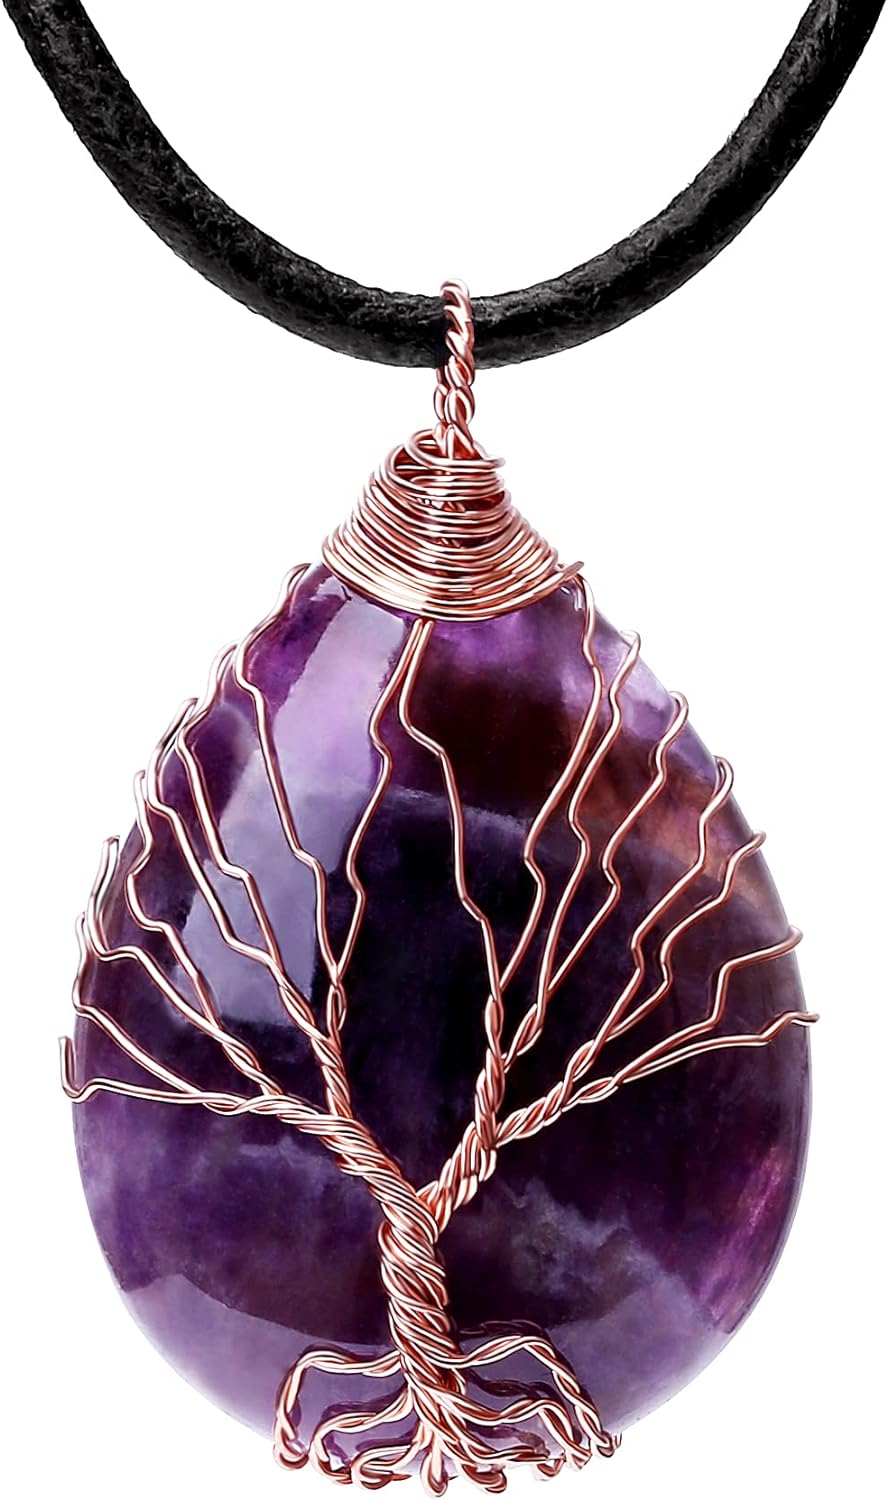 healing stones meditation jewellery Amethyst wire wrapped stone on adjustable chain chakra jewellery yoga jewellery healing